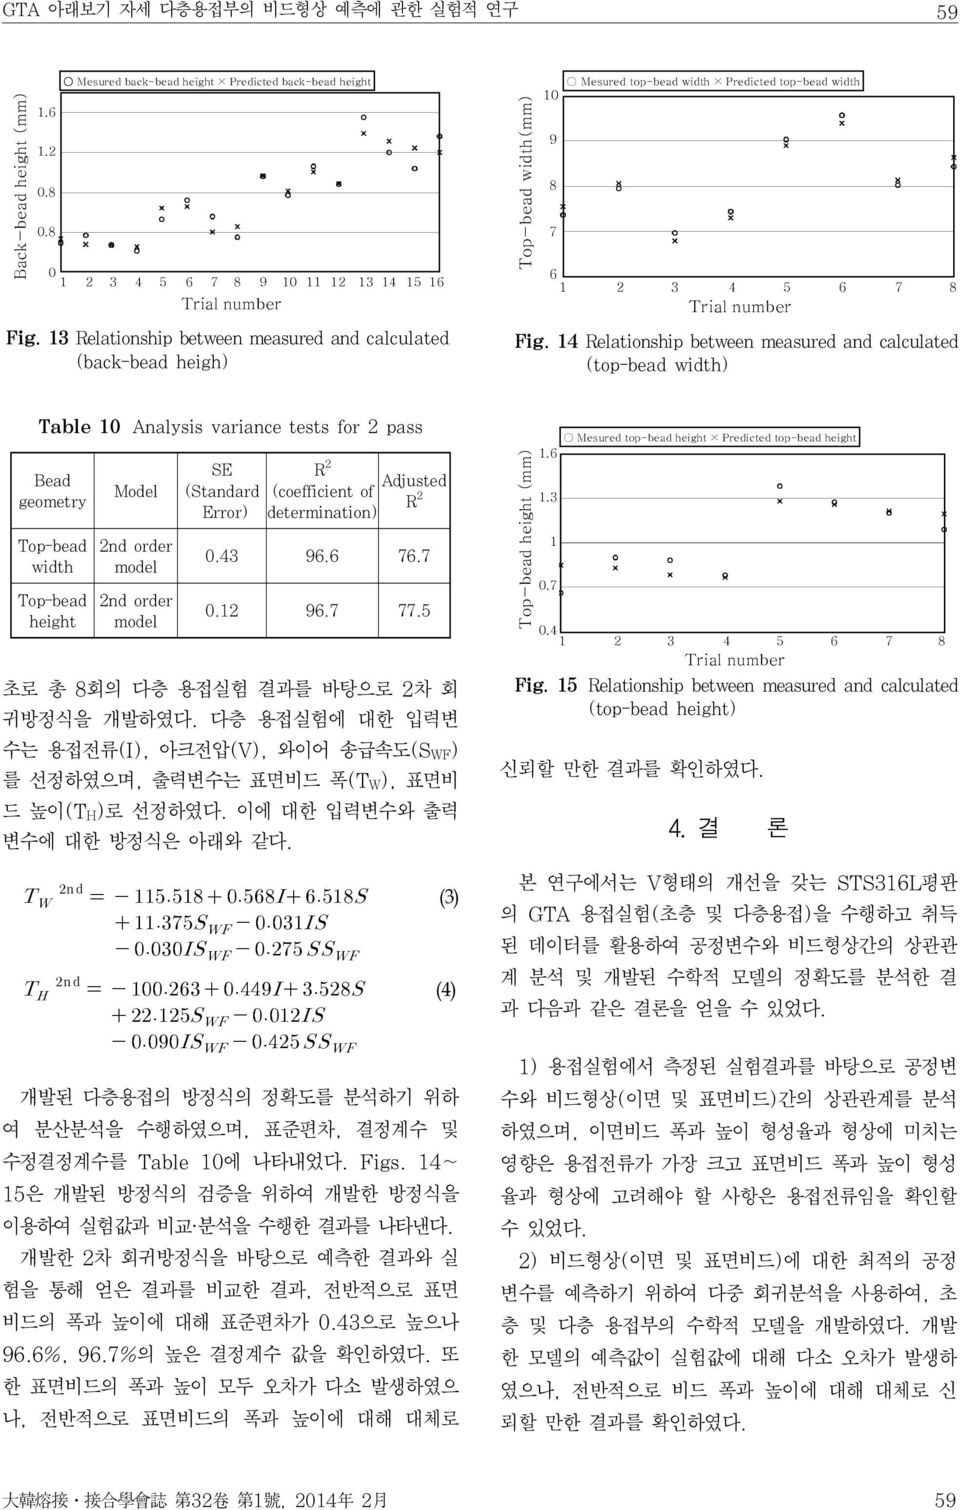 14 Relationship between measured and calculated (top-bead width) Table 10 Analysis variance tests for 2 pass Bead geometry Top-bead width Top-bead height Model 2nd order model 2nd order model SE R 2